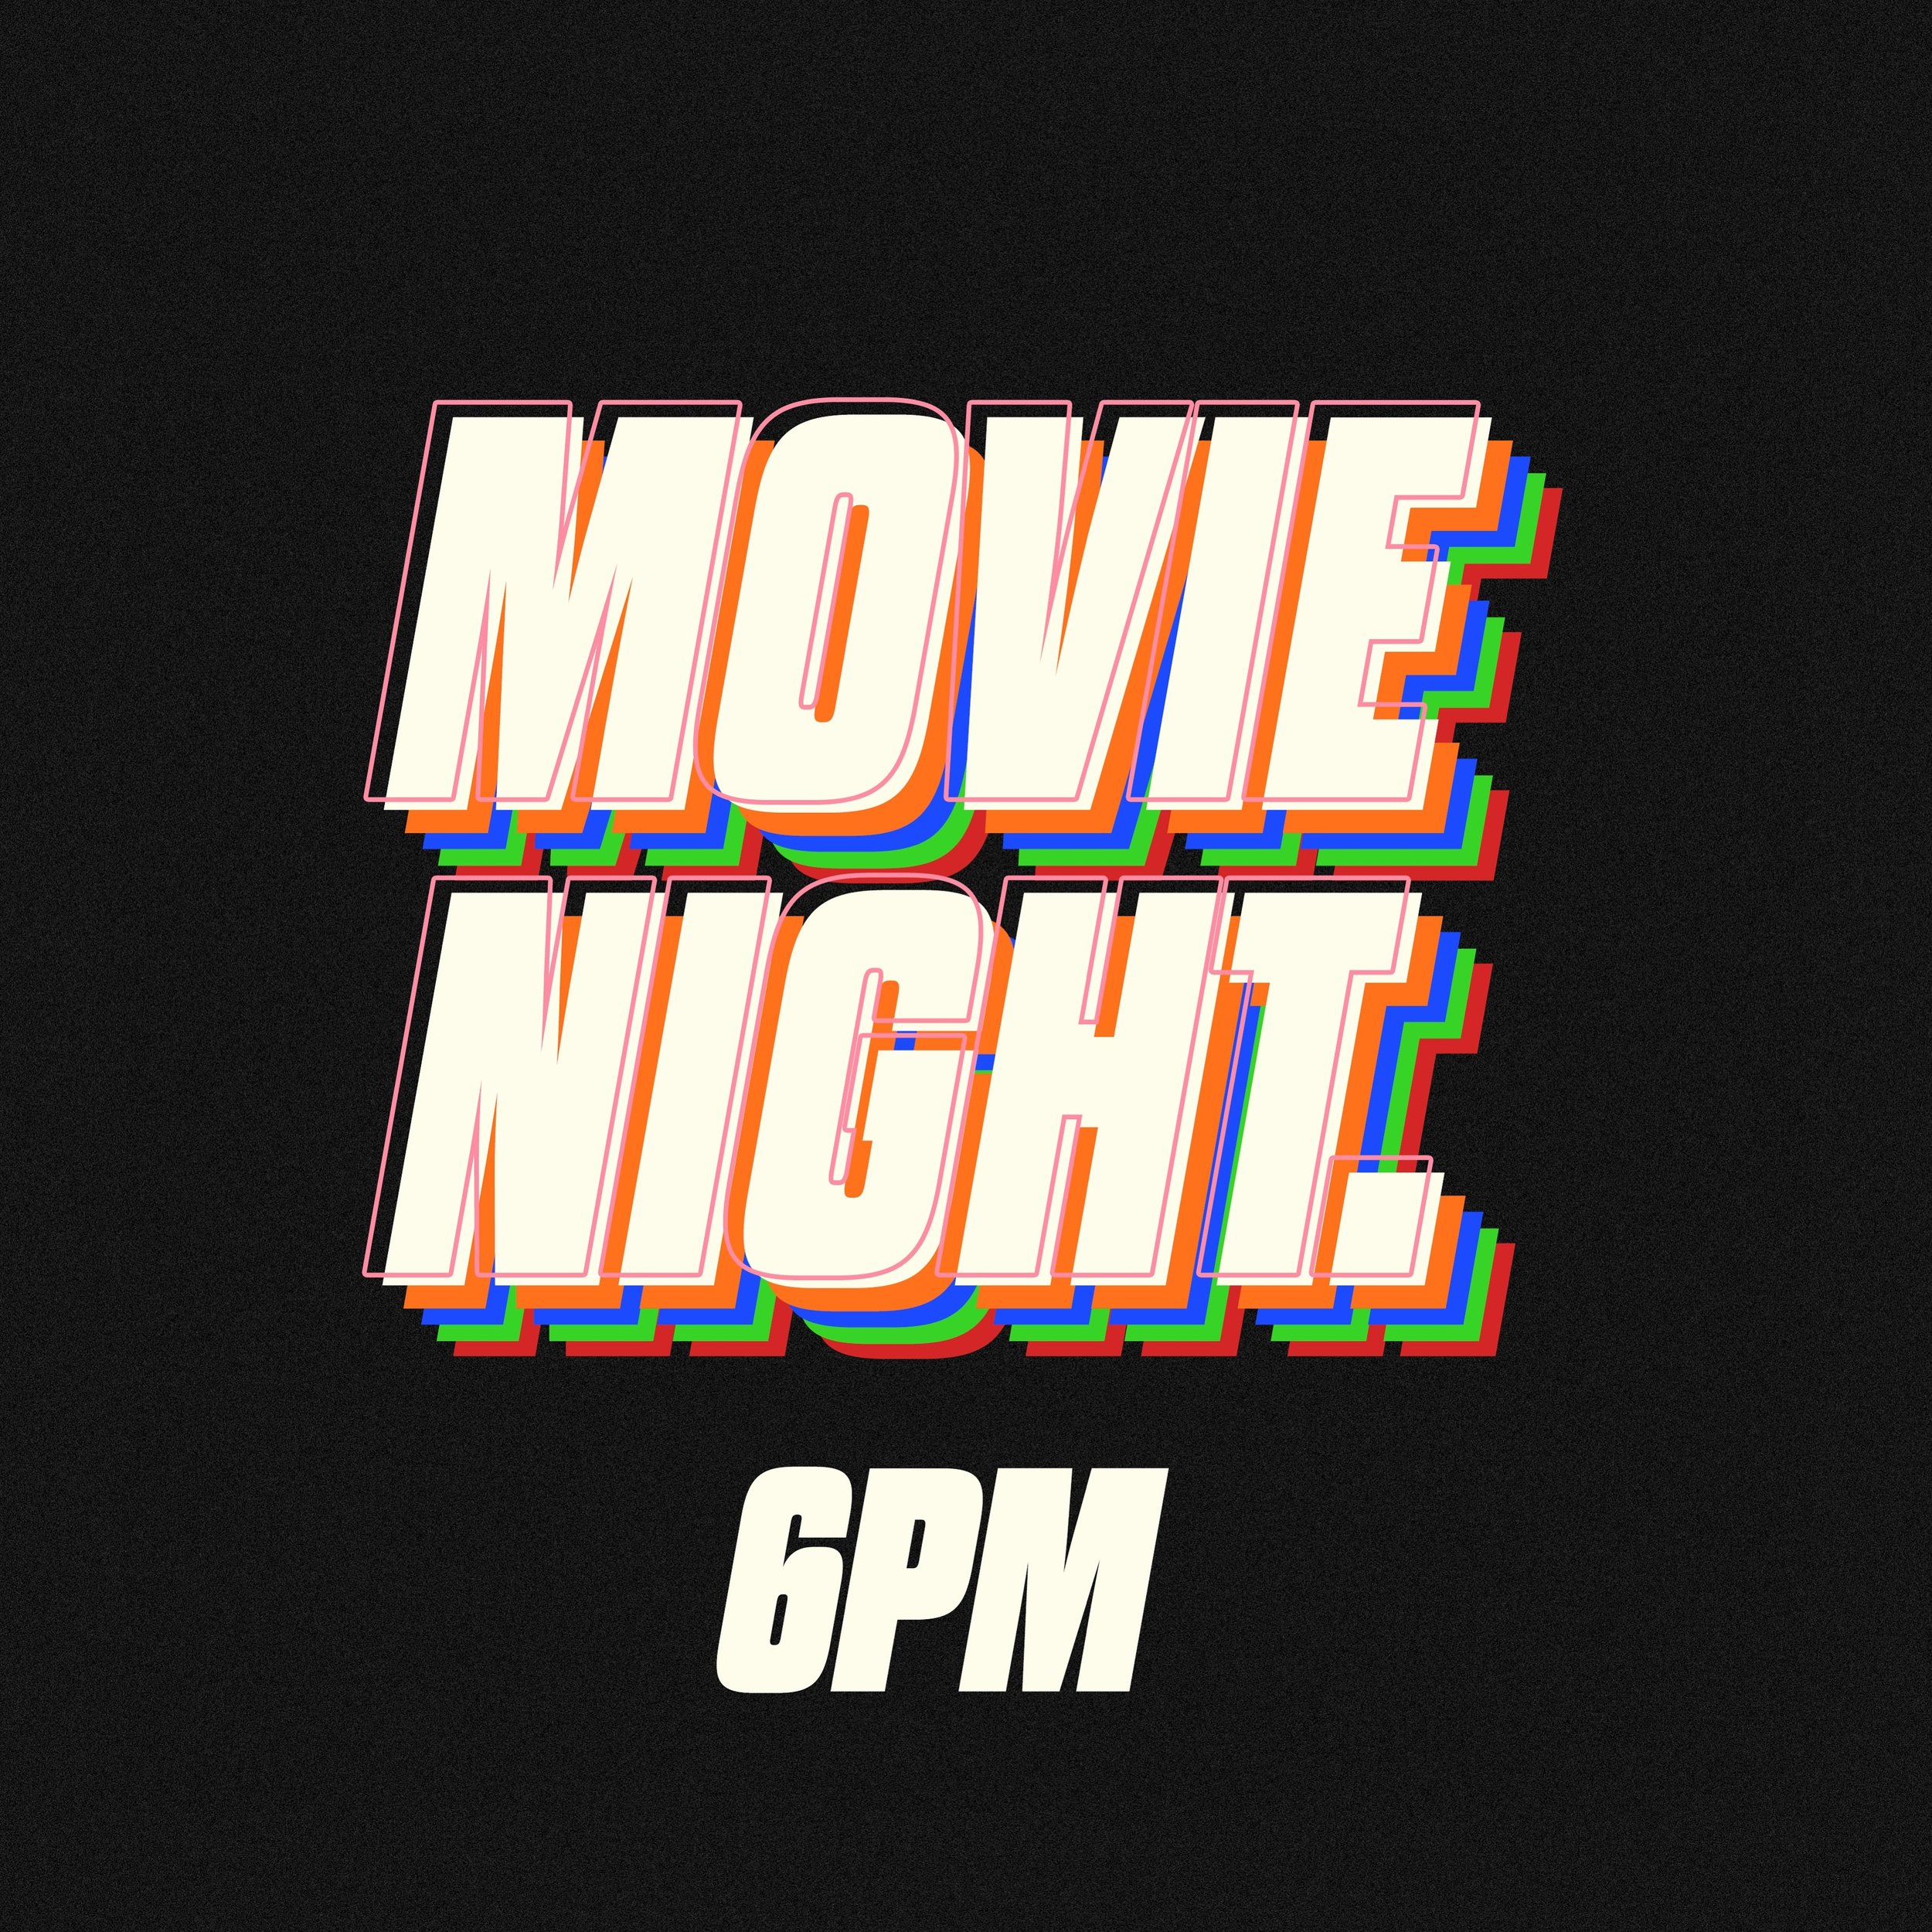 Come watch a movie with us tonight from 6:00 PM to 8:30 PM for a special screening of &ldquo;The Case for Christ.&rdquo; 🍿 Bring your pillows and blankets to get comfy 🛋️. We&rsquo;ve got all the classic movie snacks ready for you! Can&rsquo;t wait